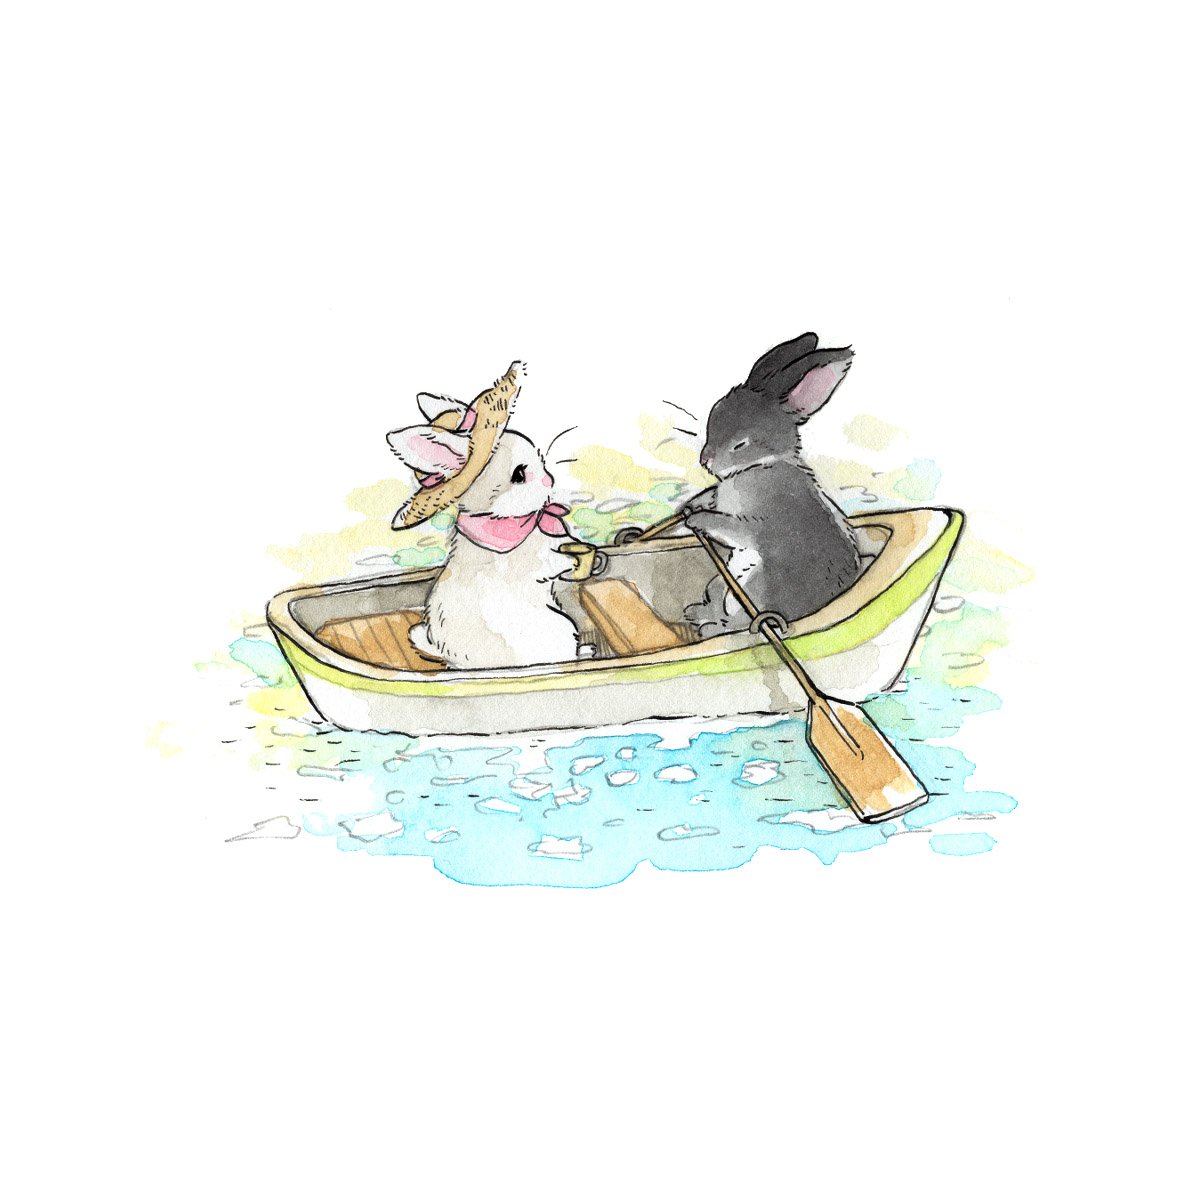 no humans hat boat rabbit watercraft water clothed animal  illustration images